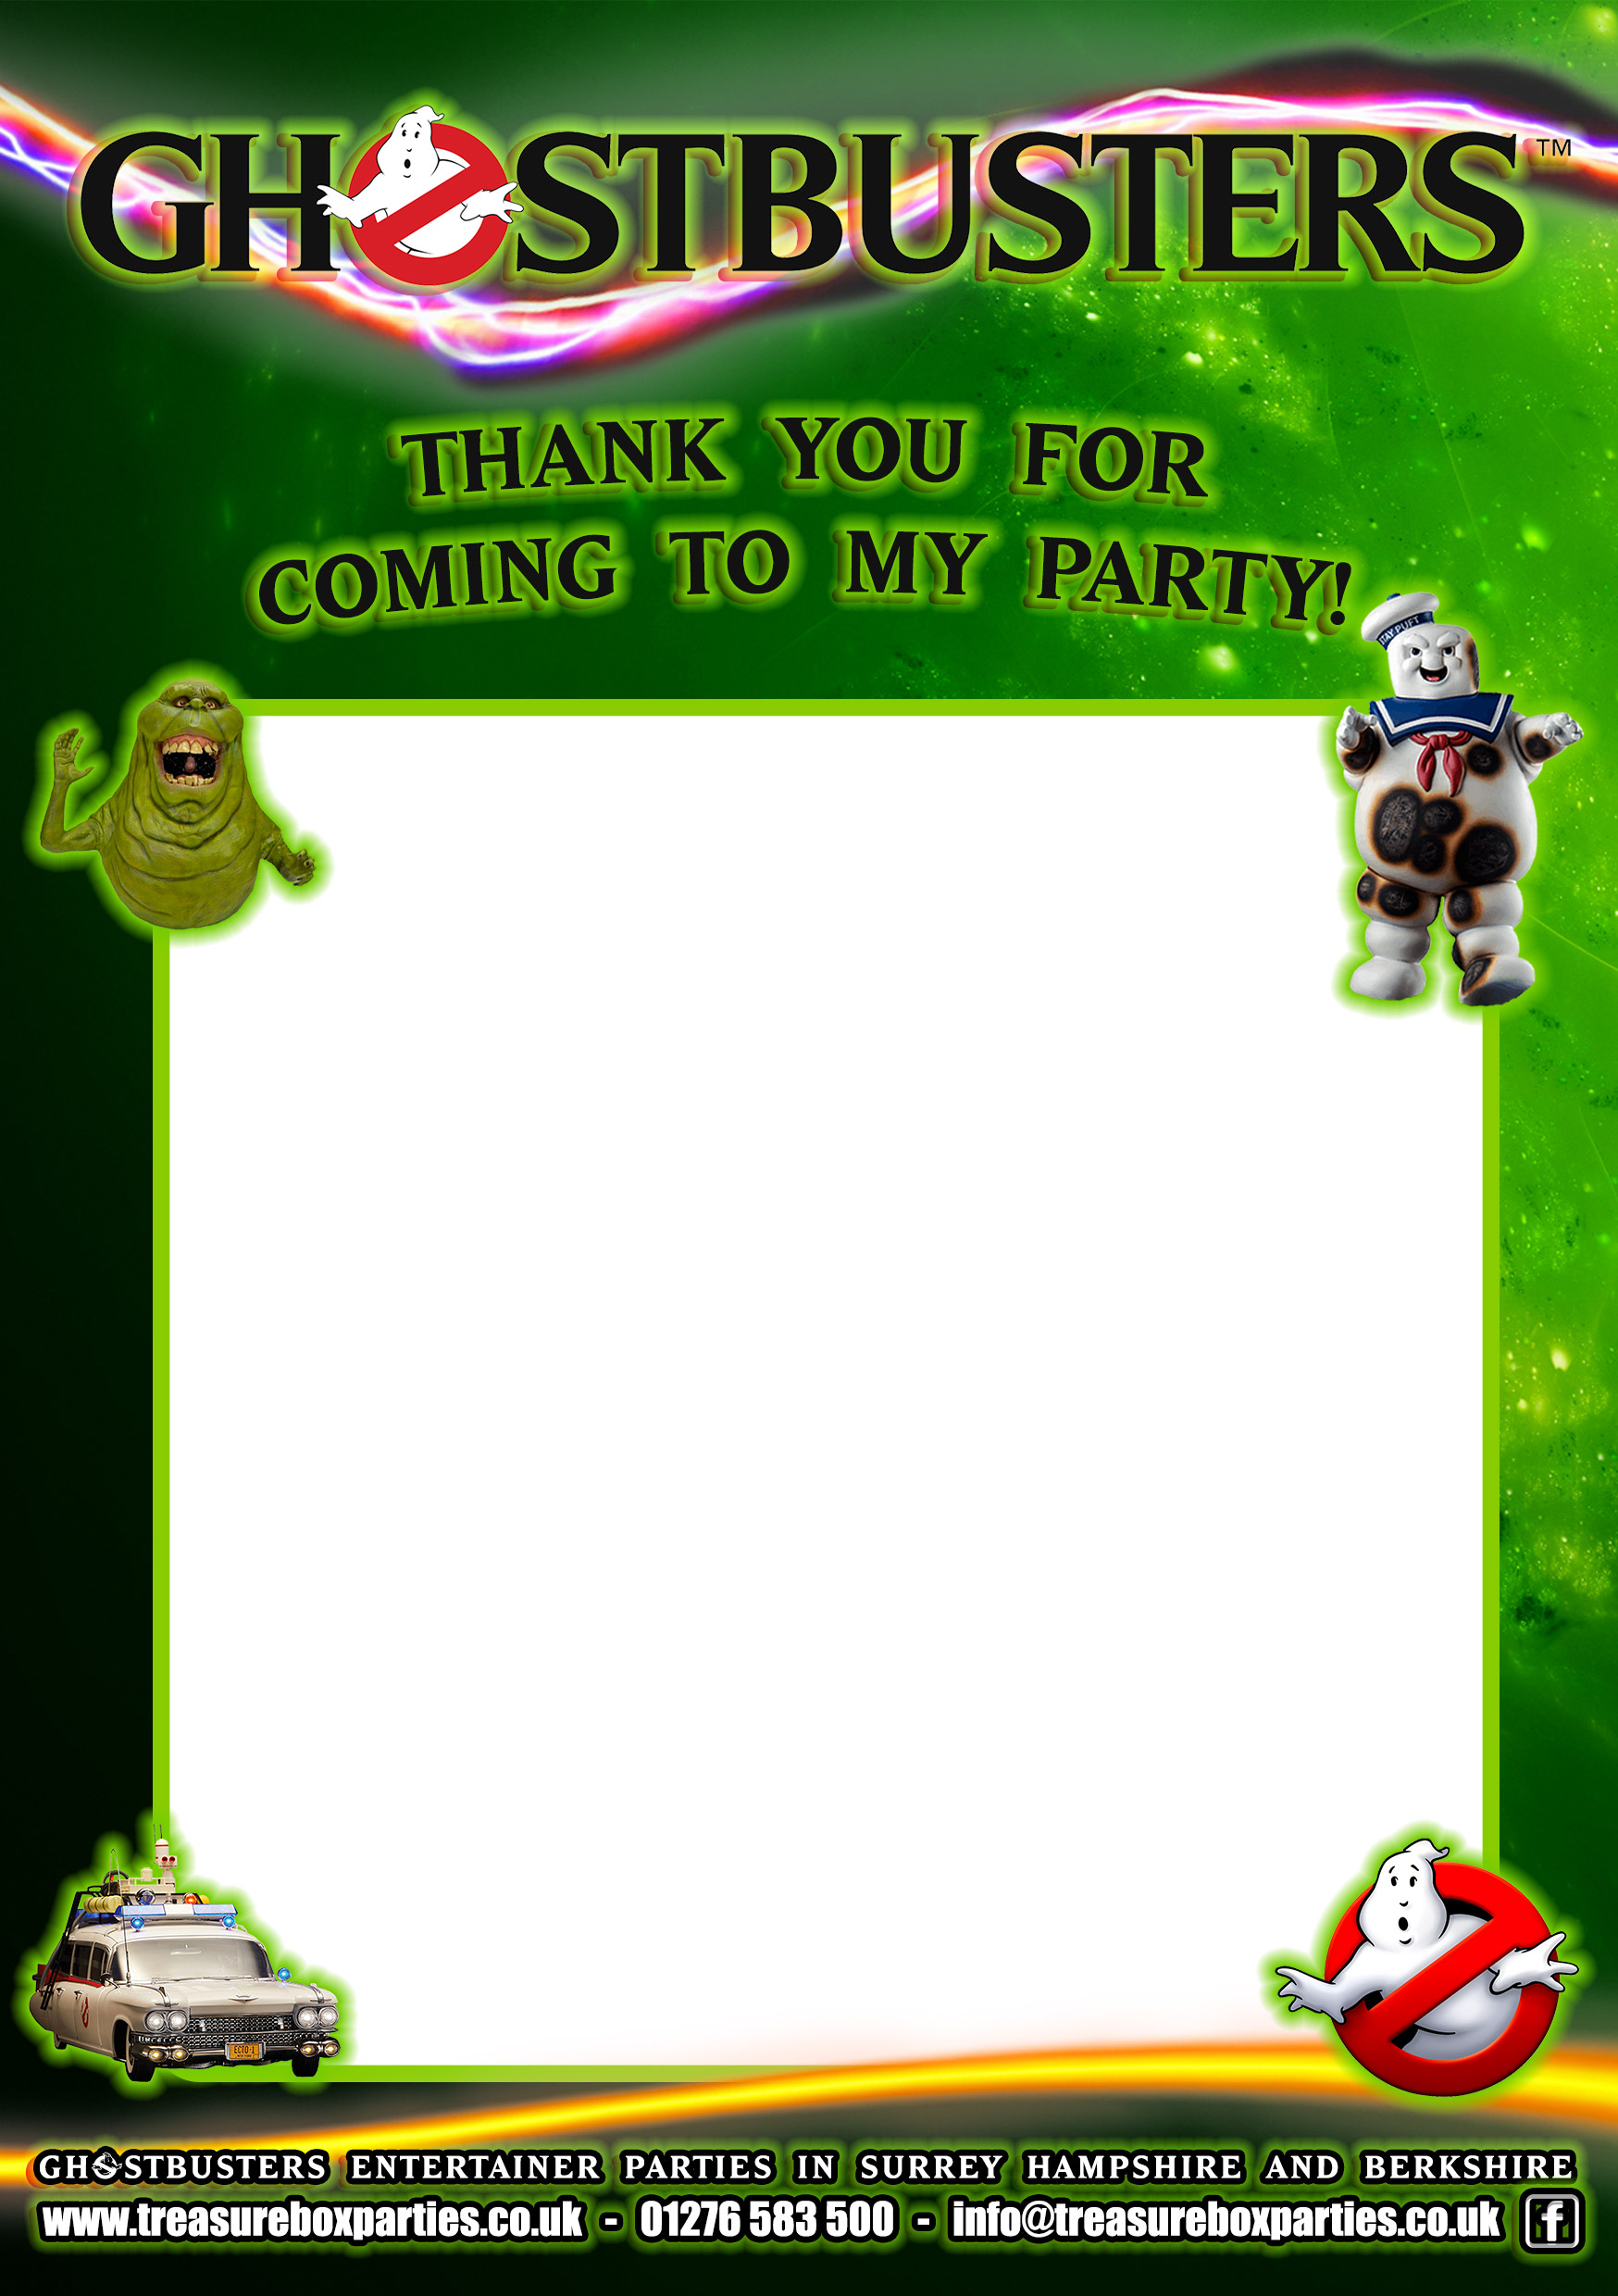 Ghostbusters Free Party Invitations And Activities Downloads Childrens Entertainer Parties Surrey Berkshire Hampshire Treasure Box Parties Supplies Kids Party Games Ideas